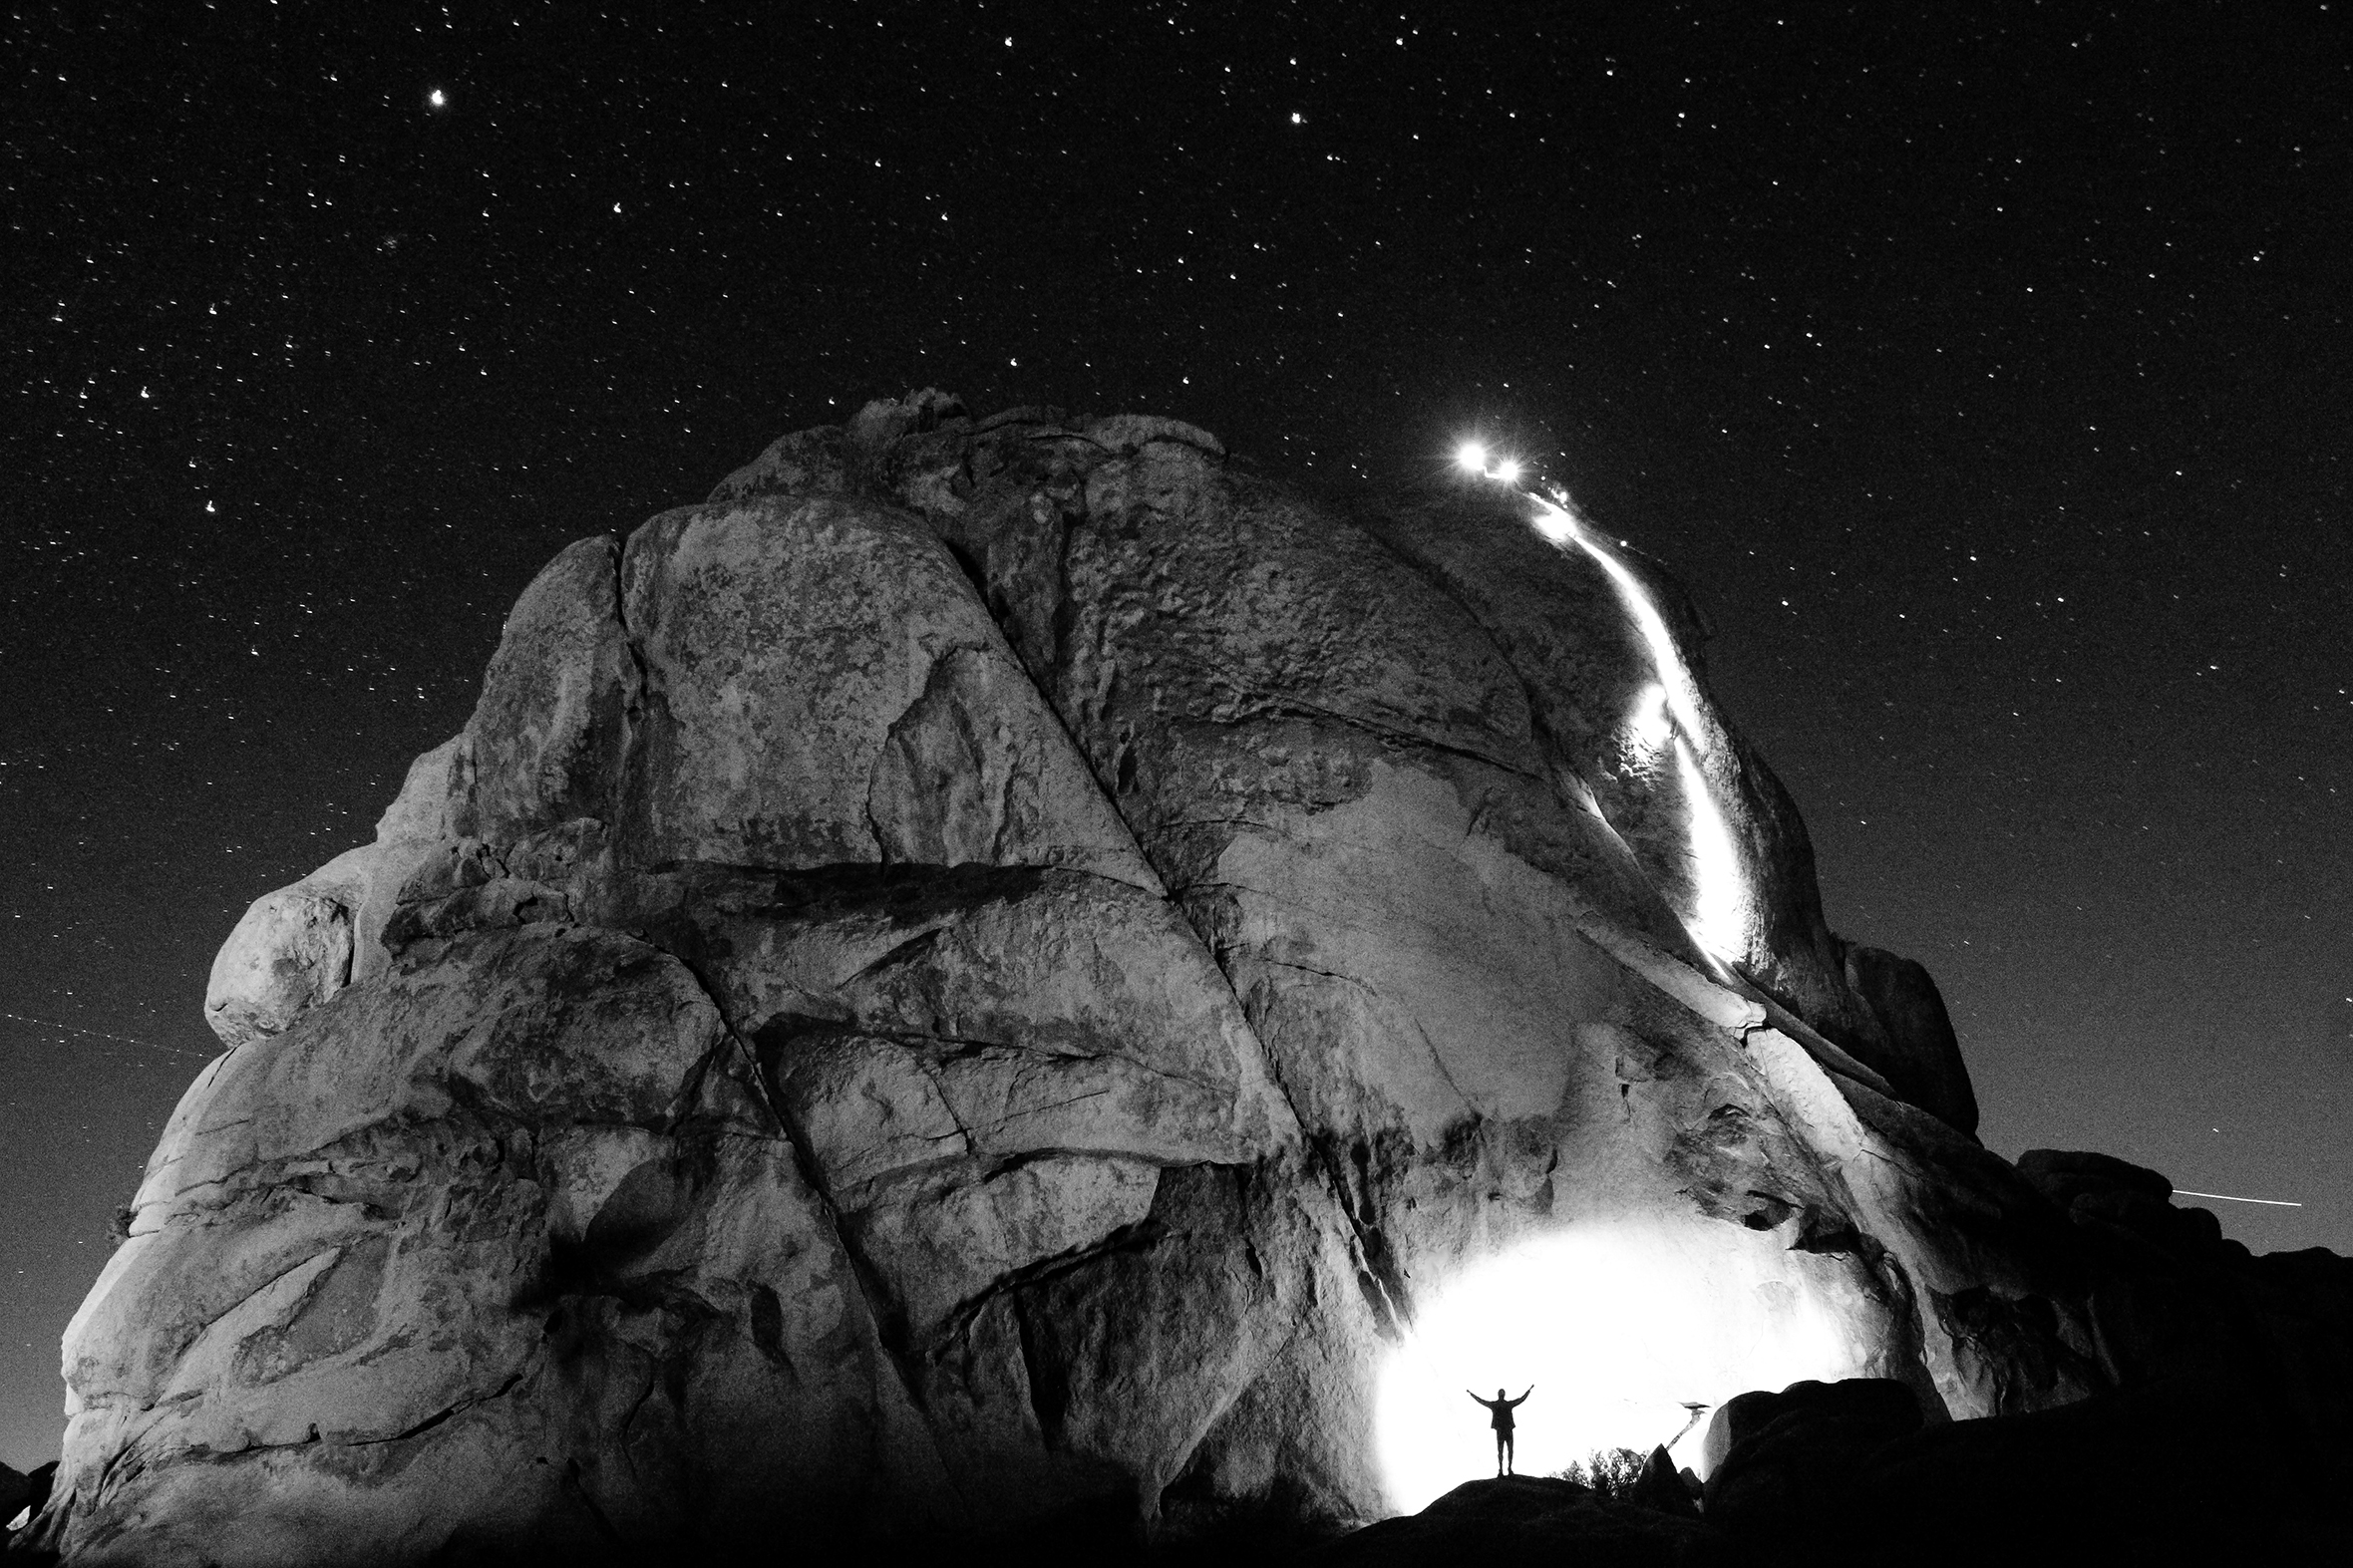 Two people rappel off a massive boulder in the desert of Joshua Tree National Park in Southern California at night under a blanket of stars while another person with outstretched arms cheers from the base. Spotlights illuminate the small figures.